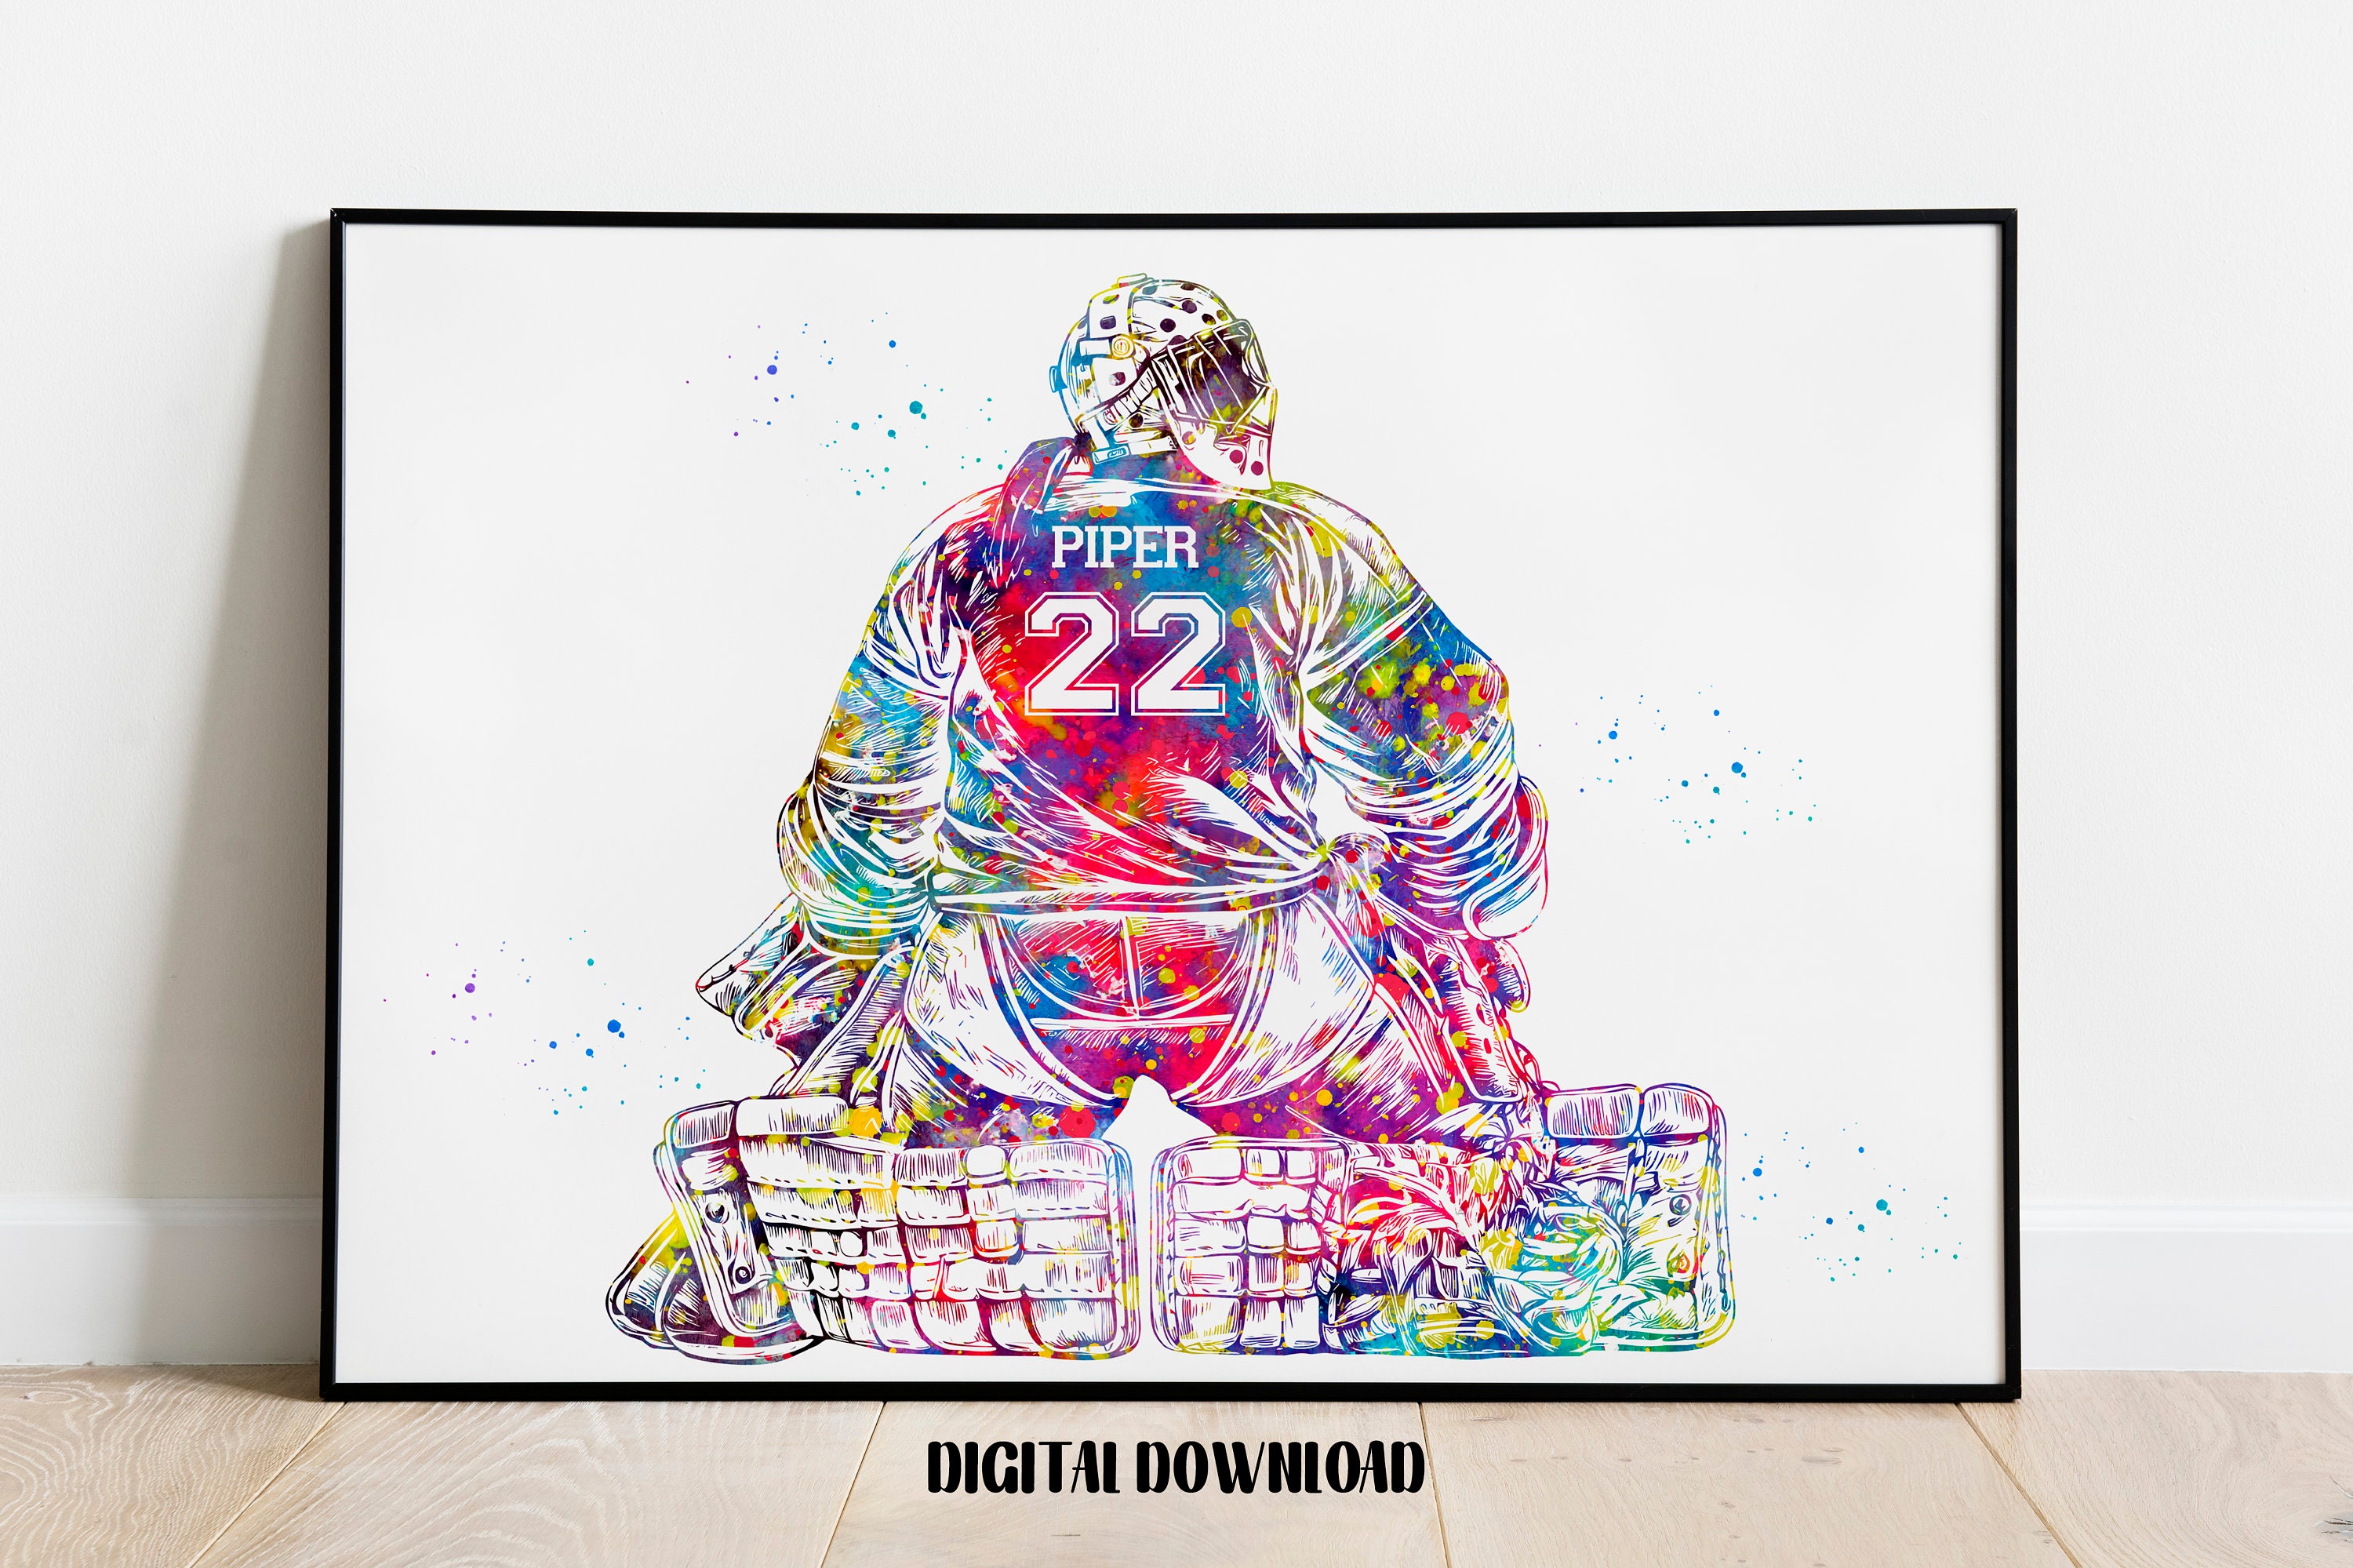 Ice Hockey Girl Goalie Watercolor Silhouette Poster by LotusArt